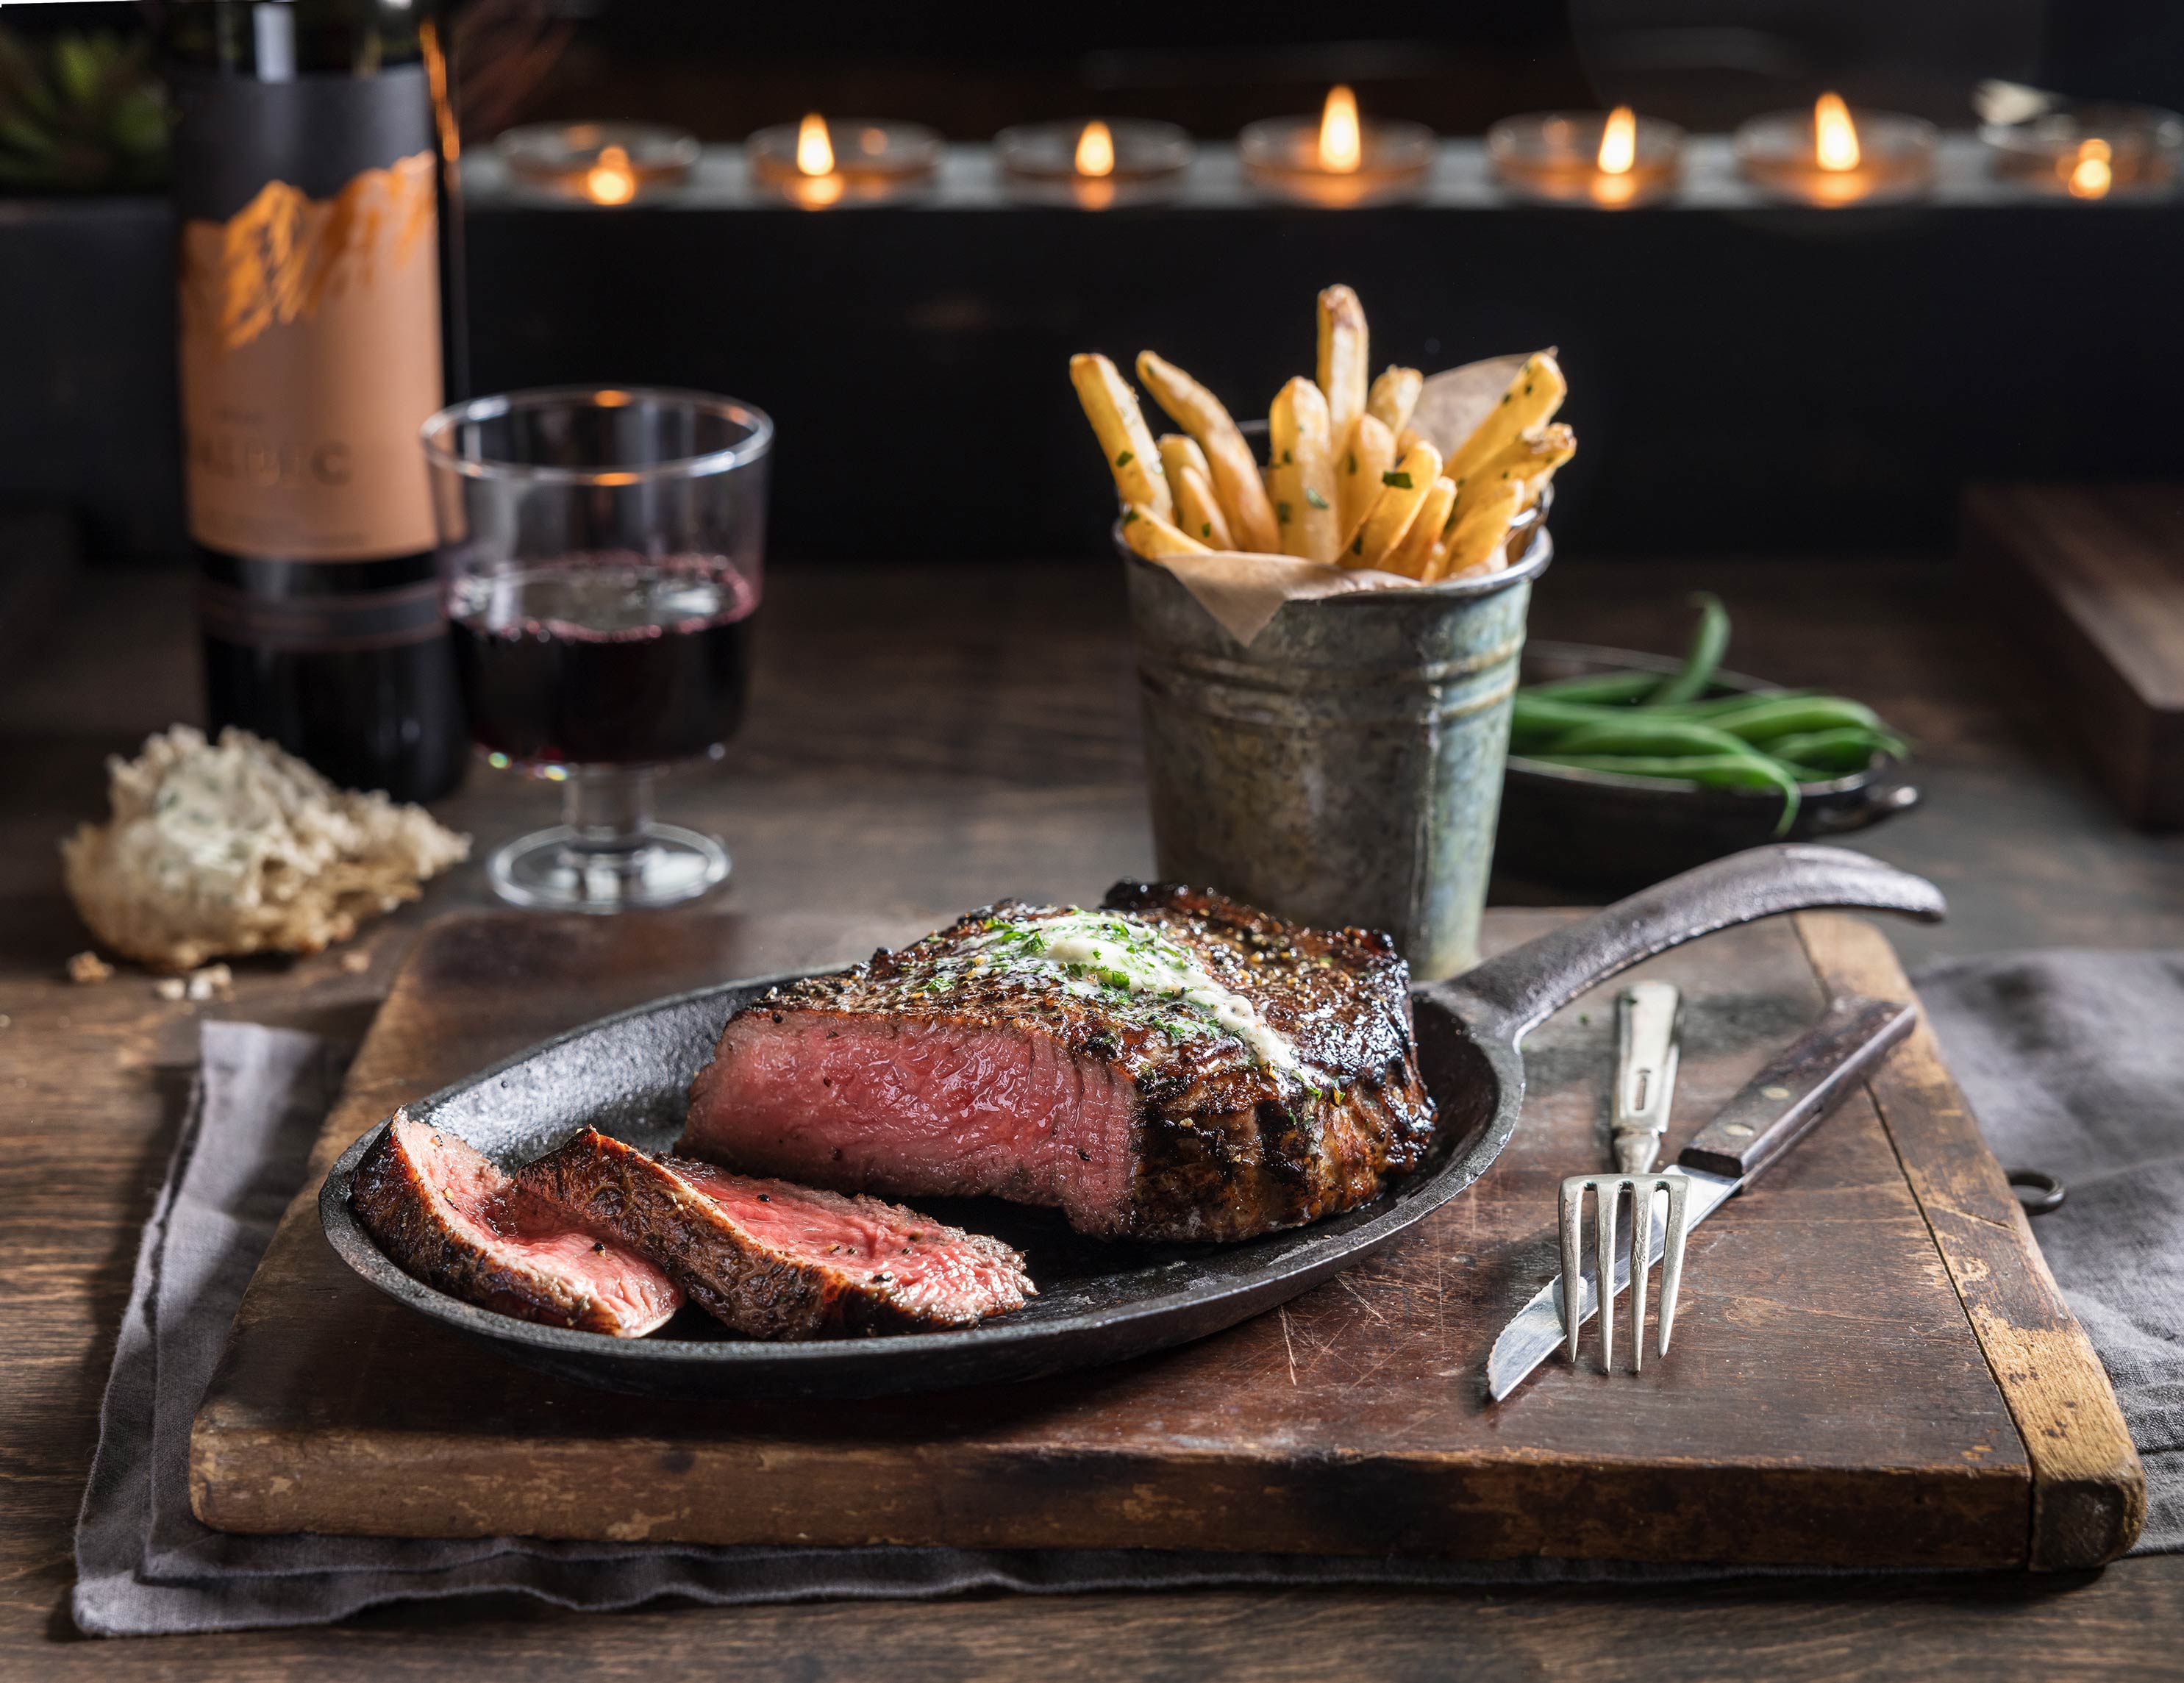 Glanger Photography | Medium rare steak on a skillet with herb butter, fries and green beans.  Rustic restaurant with wine, torn bread and candles in the background. 